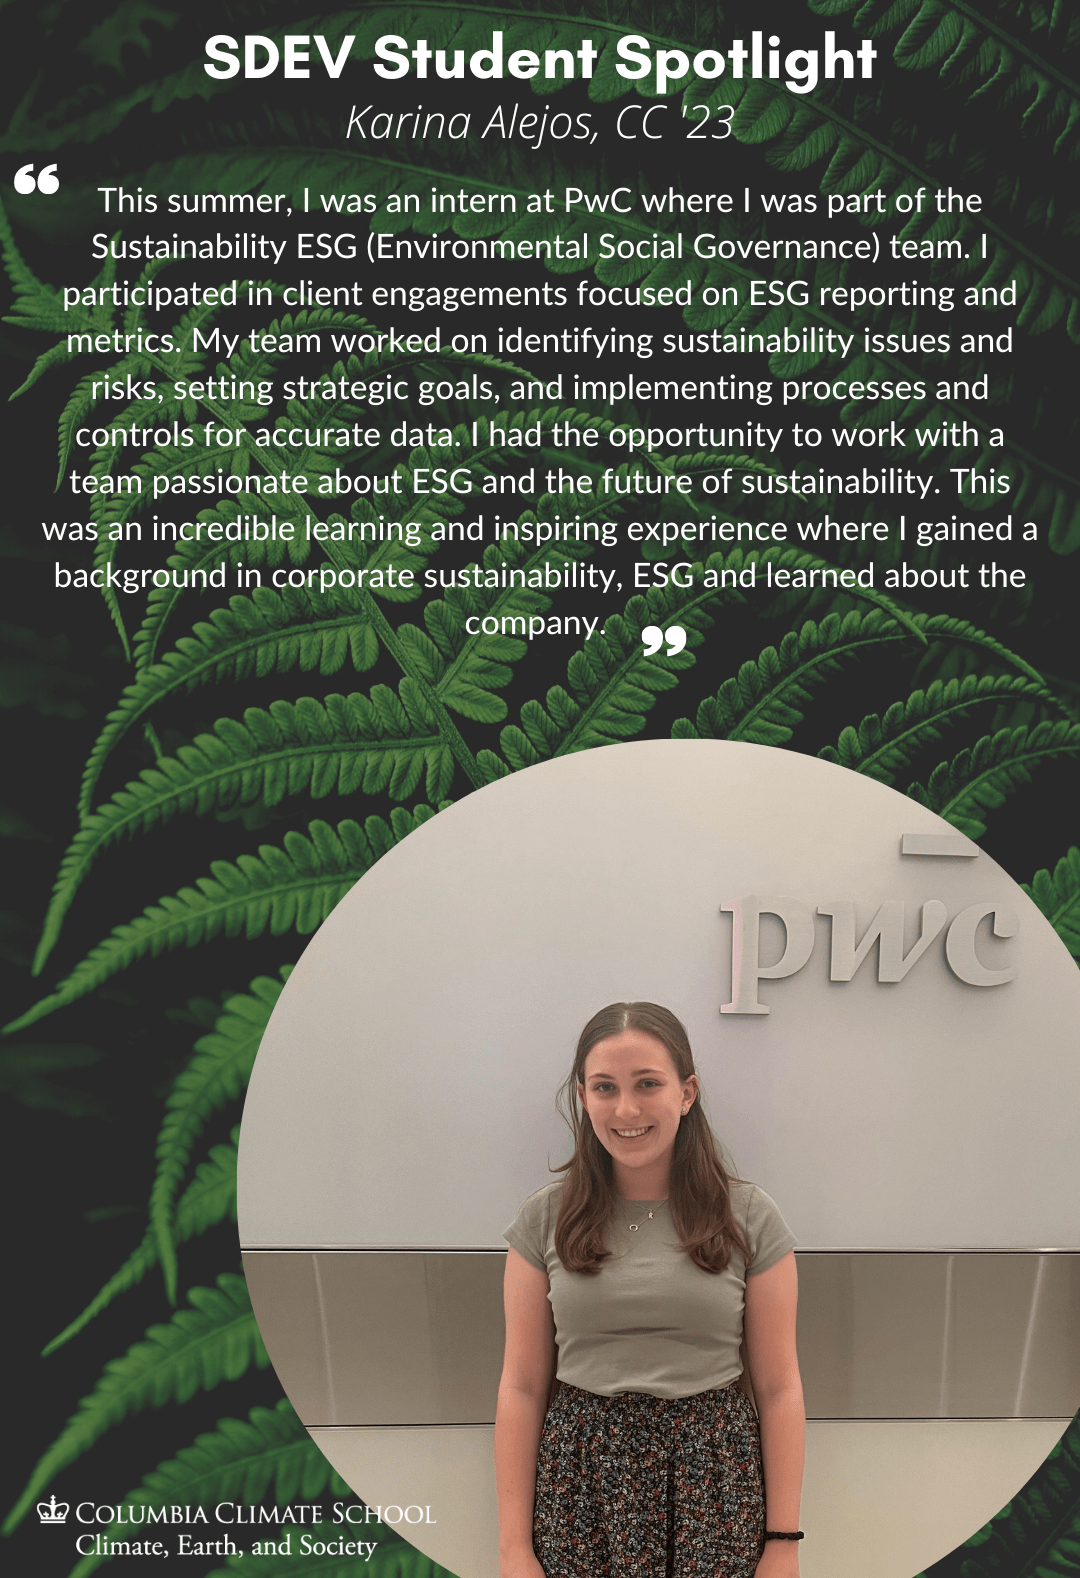 Karina Alejos, class of 2023, interned at PwC as part of the Sustainability Environmental Social Governance team. 